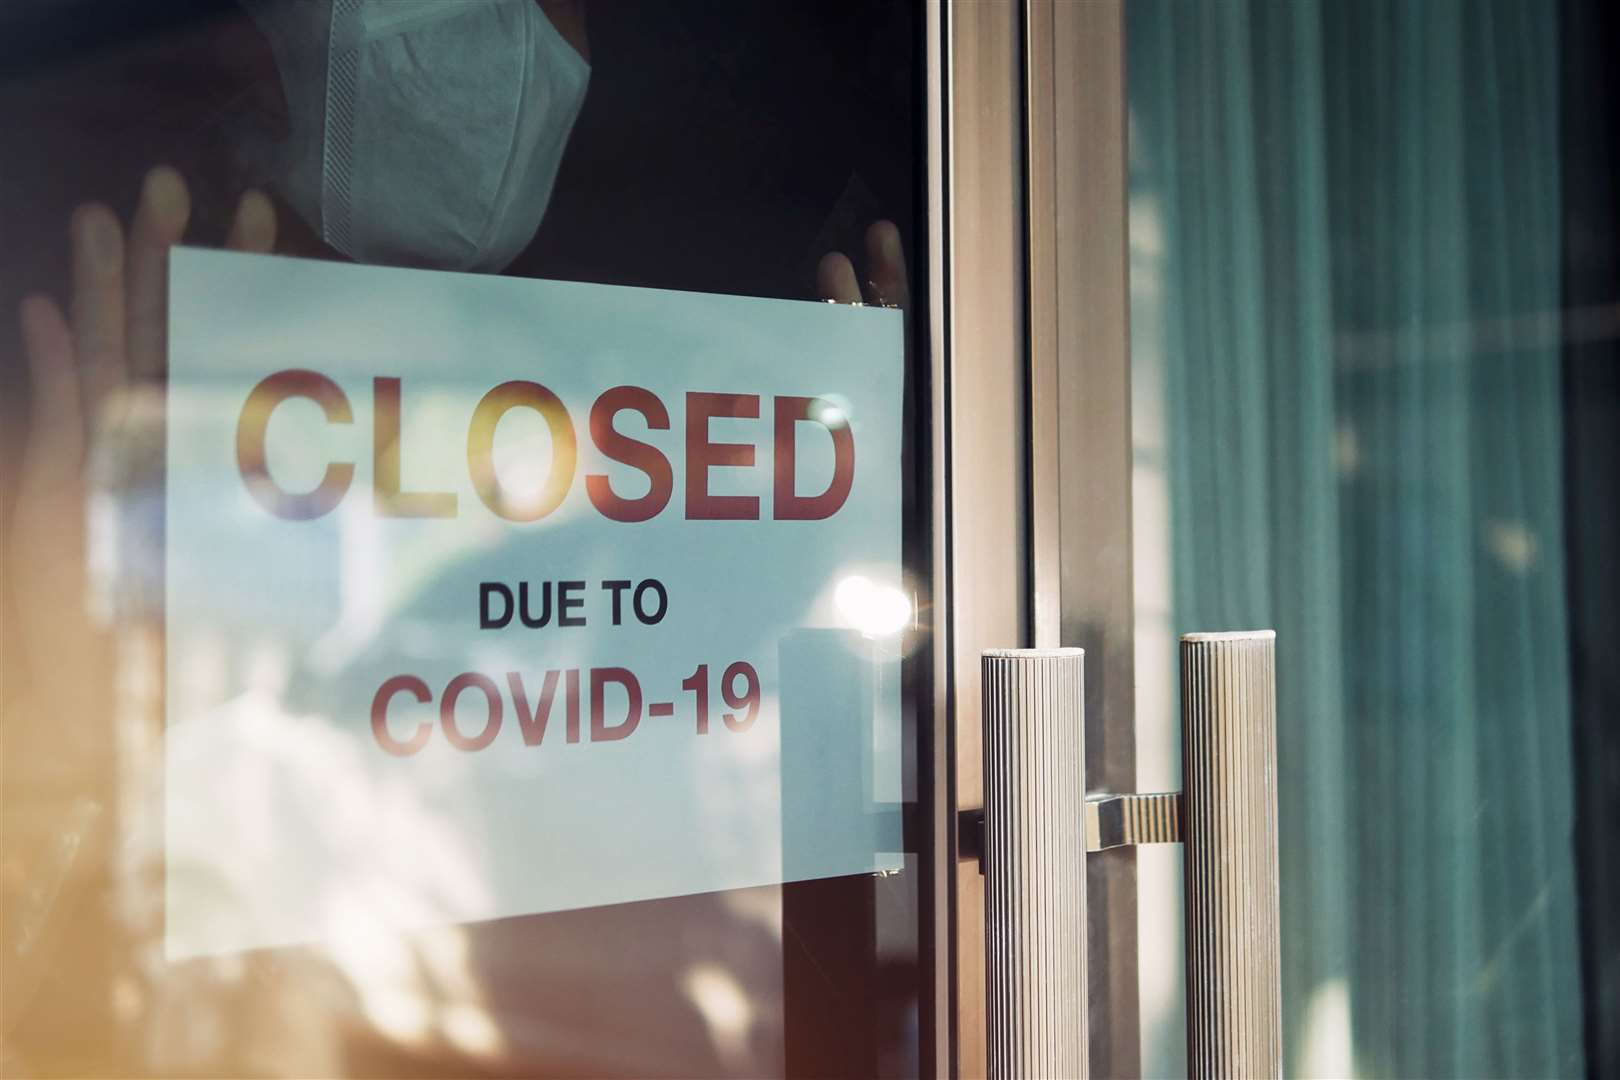 Many firms have faced major challenges after being forced to shut down during the pandemic